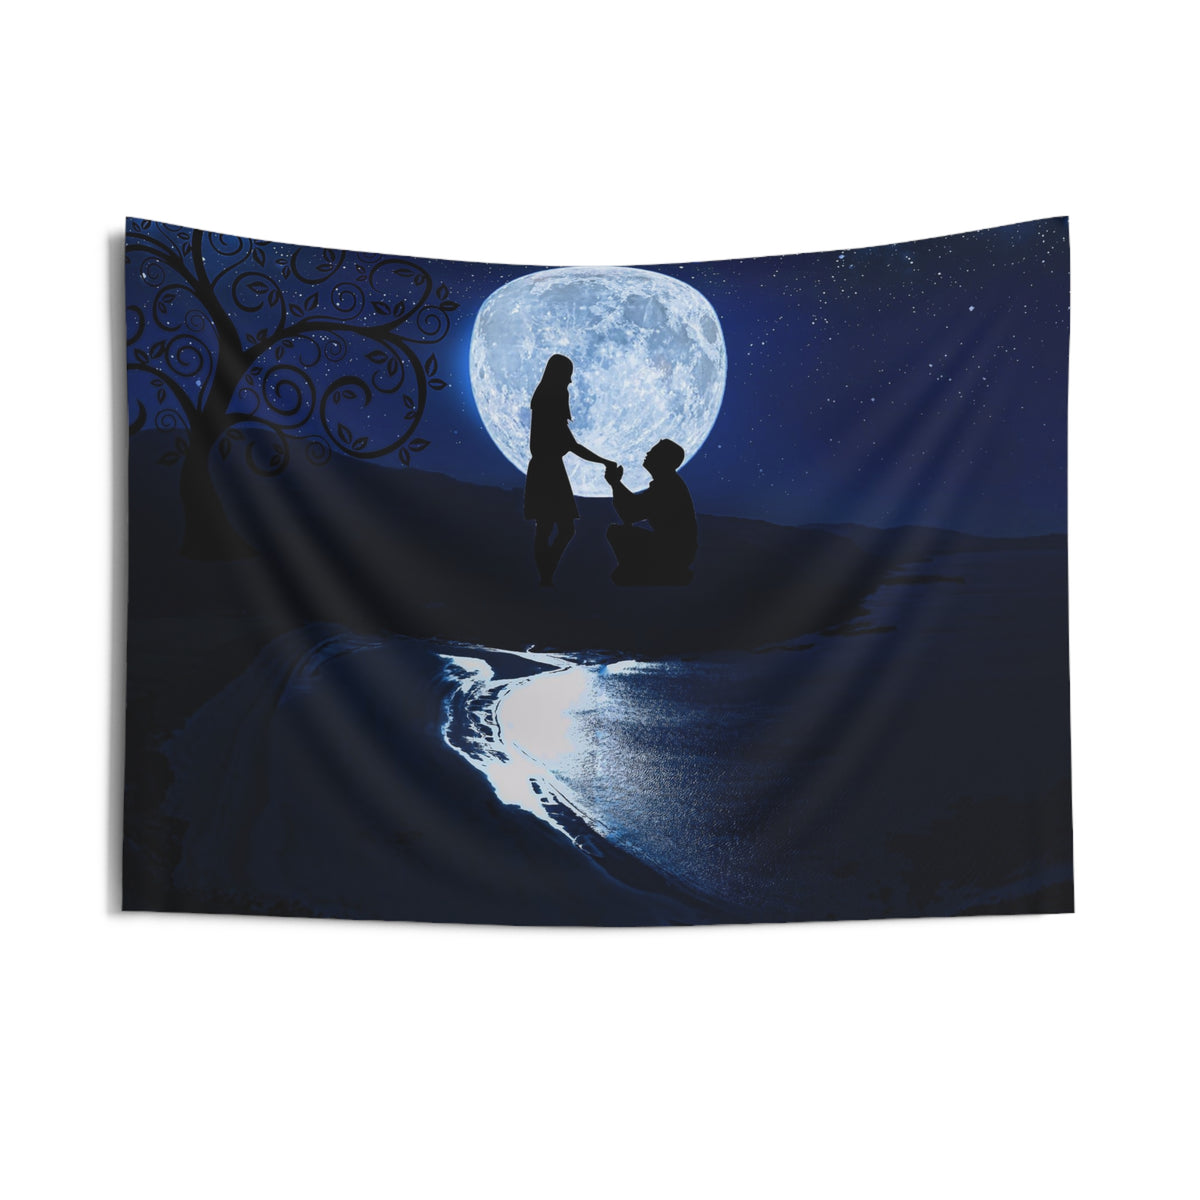 Couple propose in Moonlight Tapestry